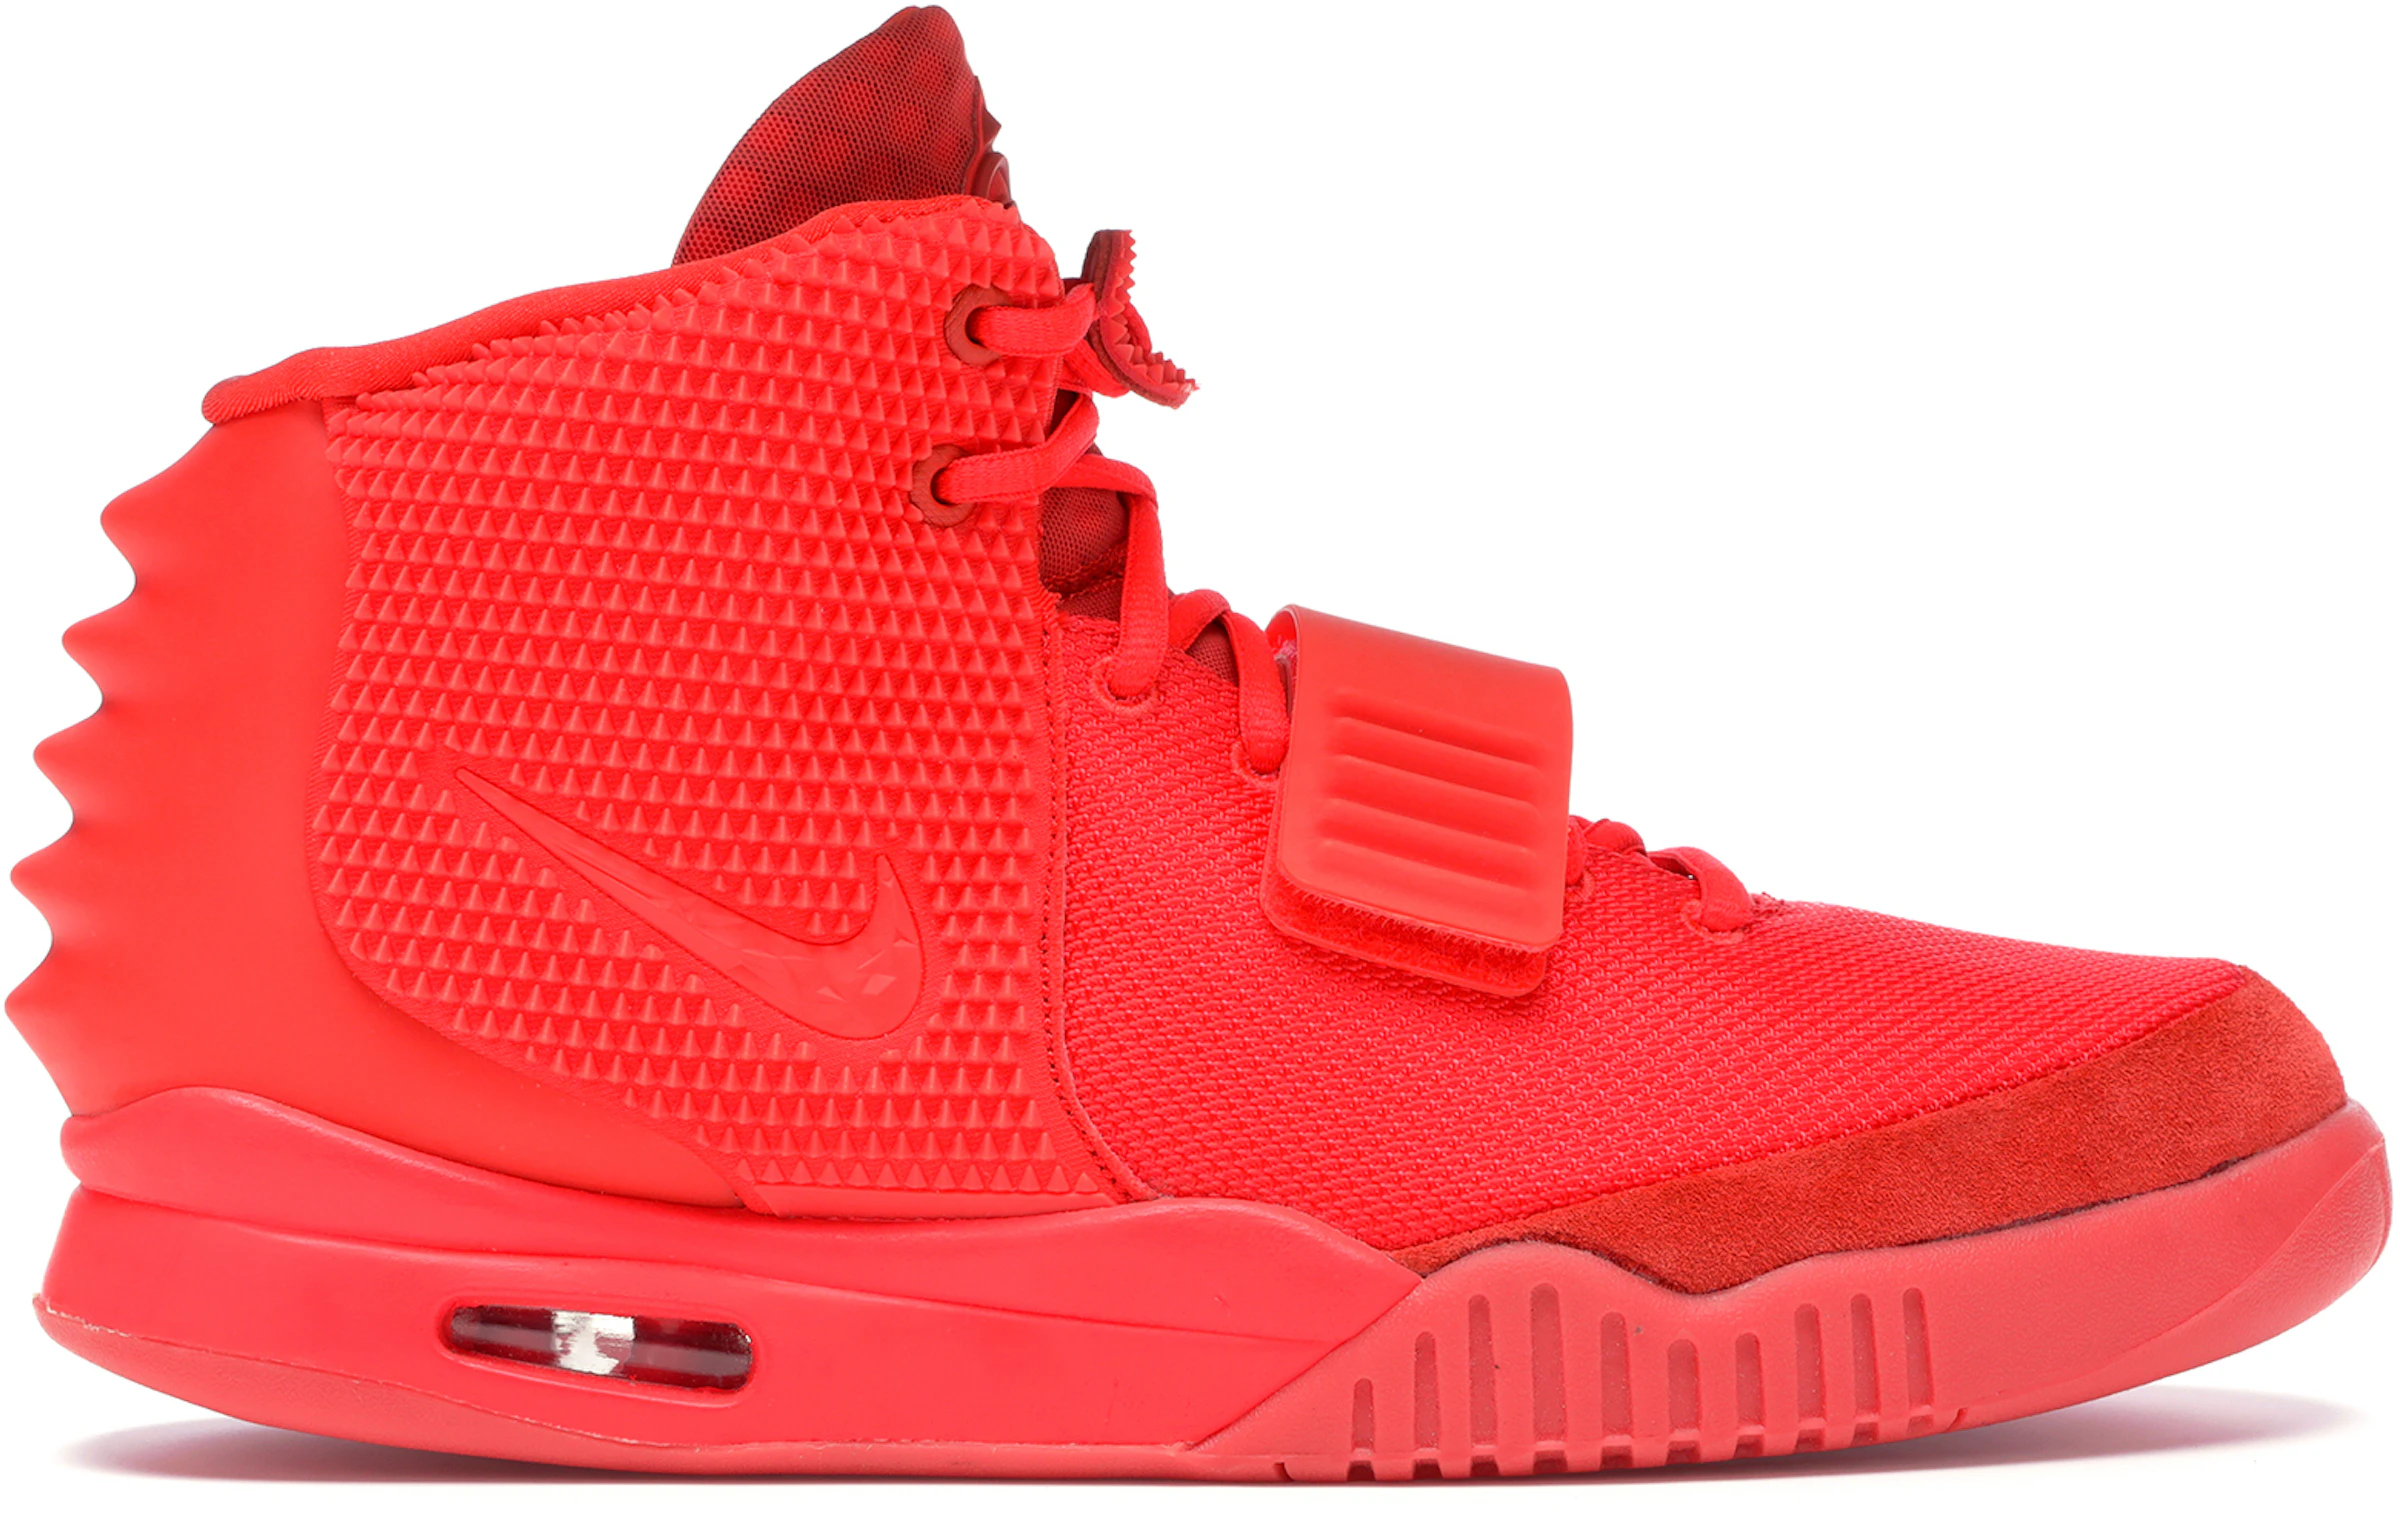 Nike Air Yeezy 2 Red October - 508214-660 - US